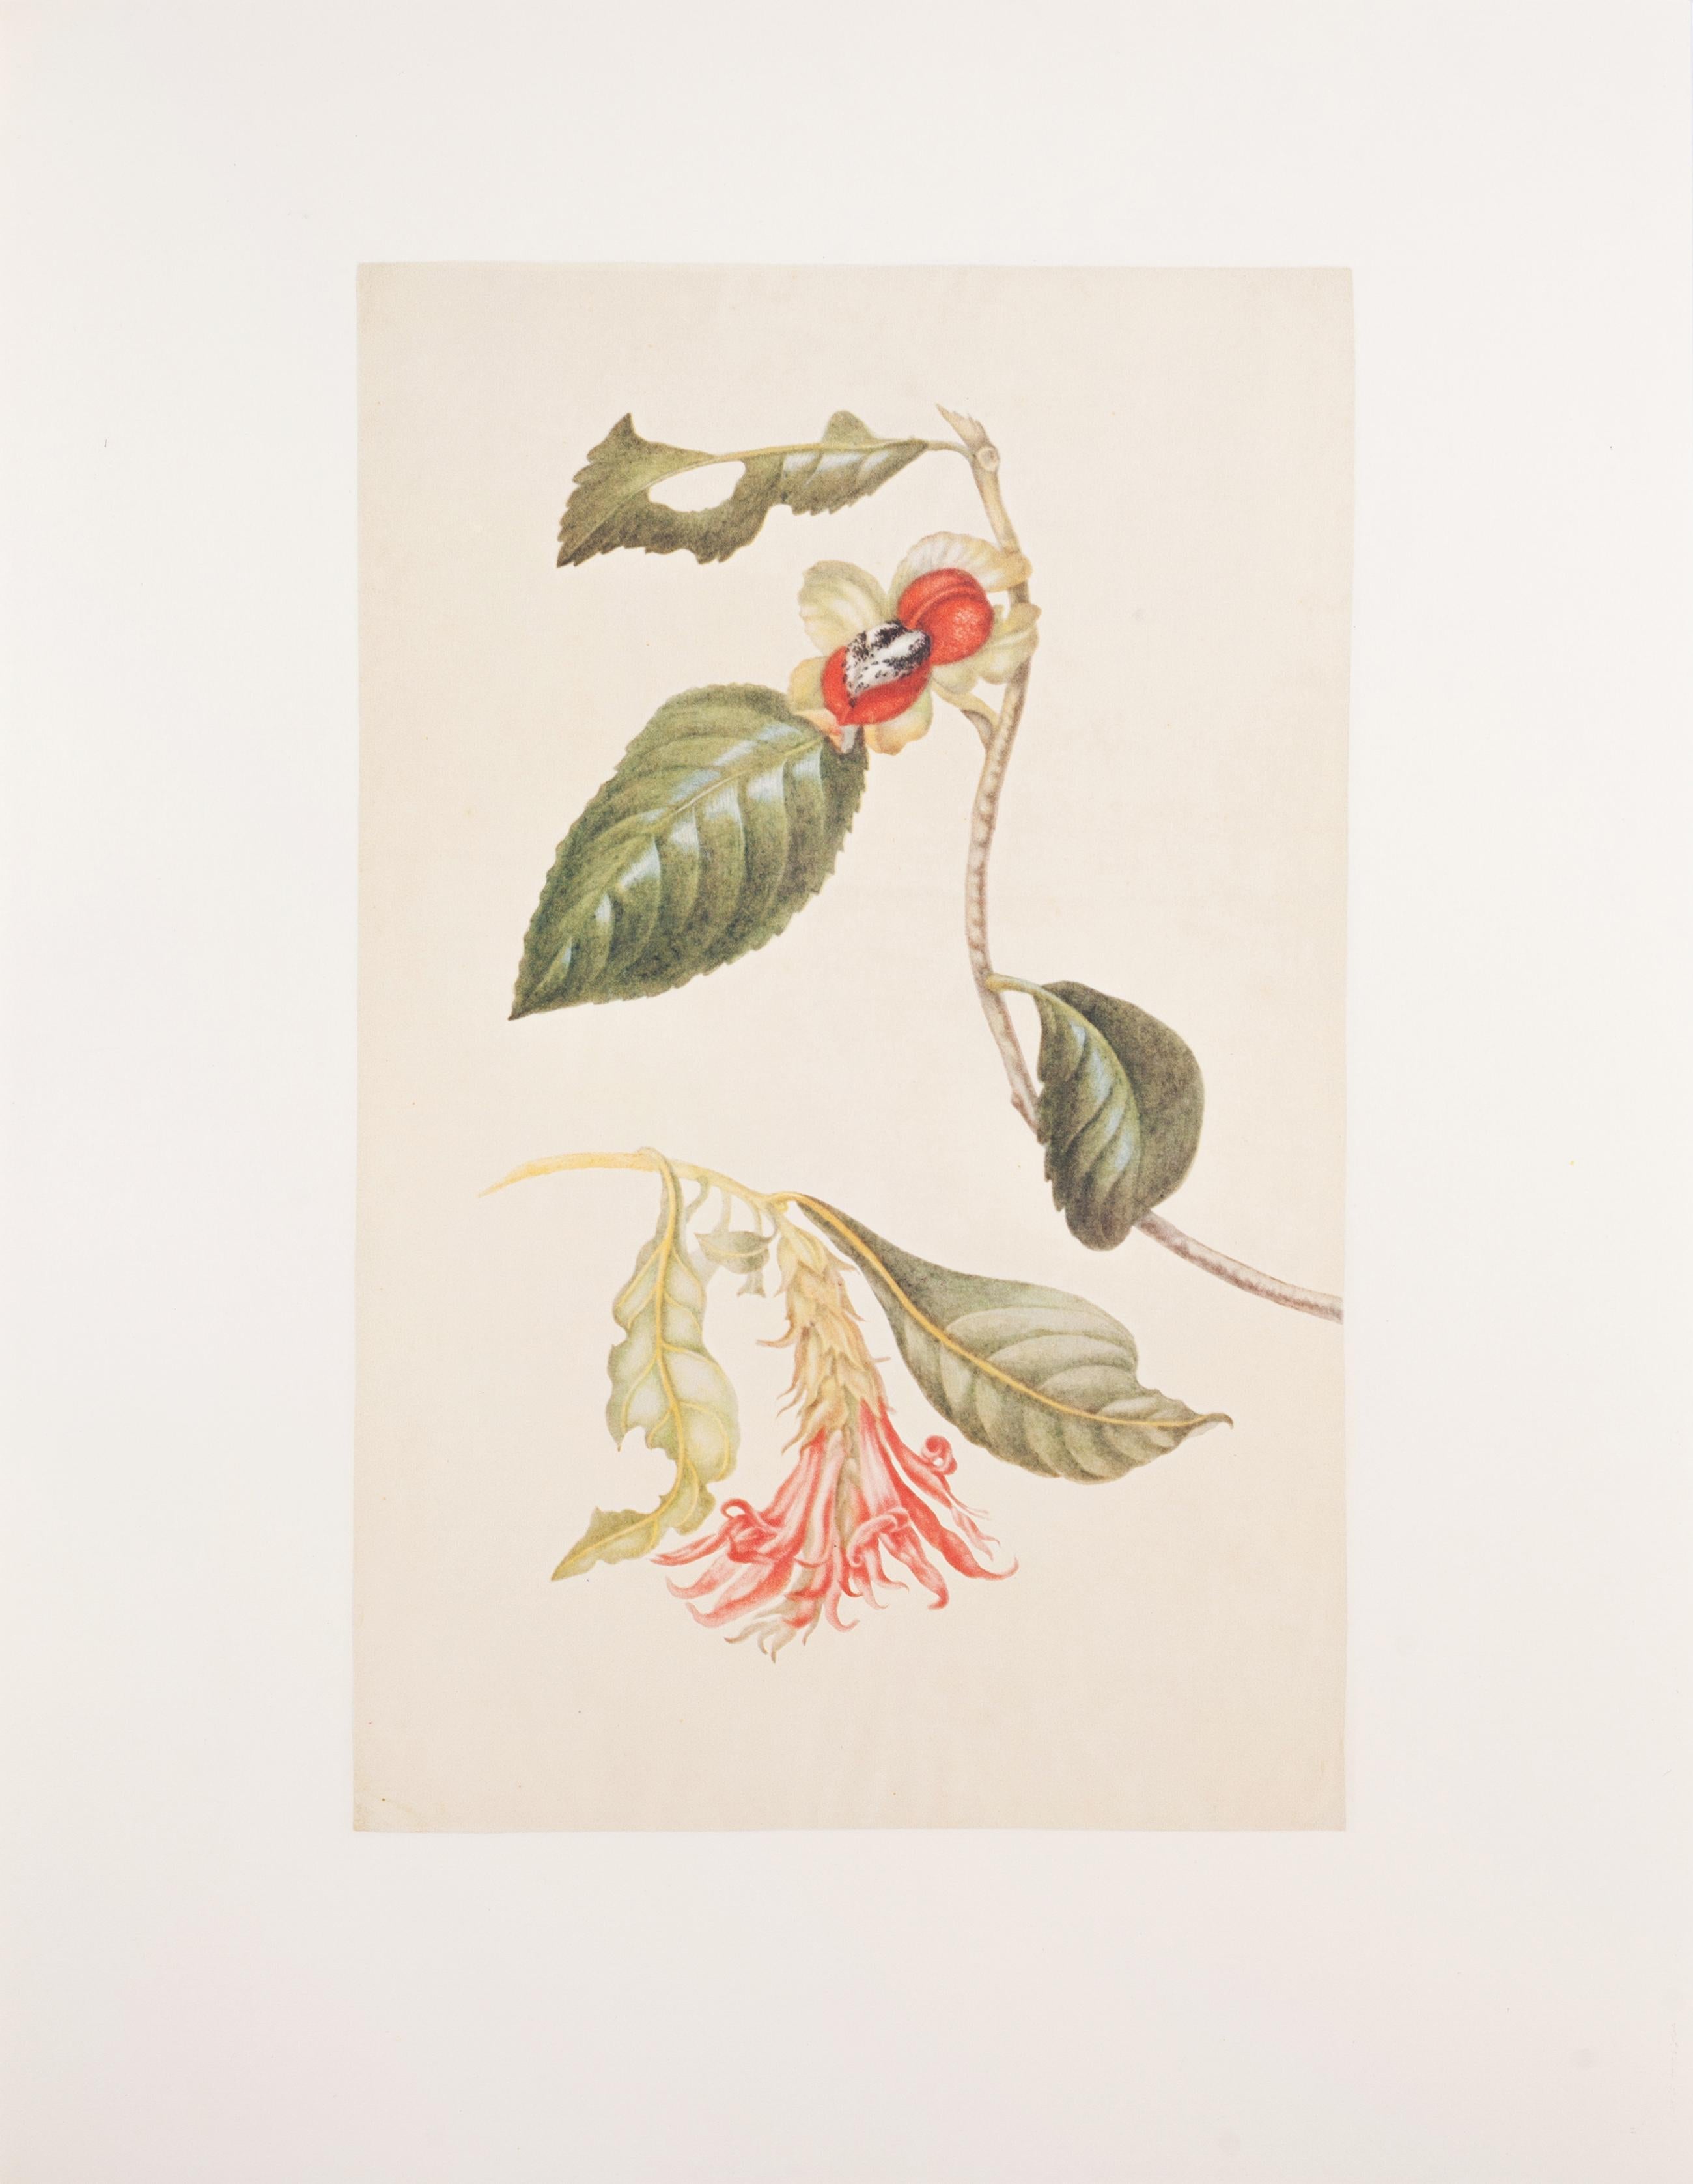 25. Spray of flowers, not clearly identifiable  - Print by Maria Sybilla Merian